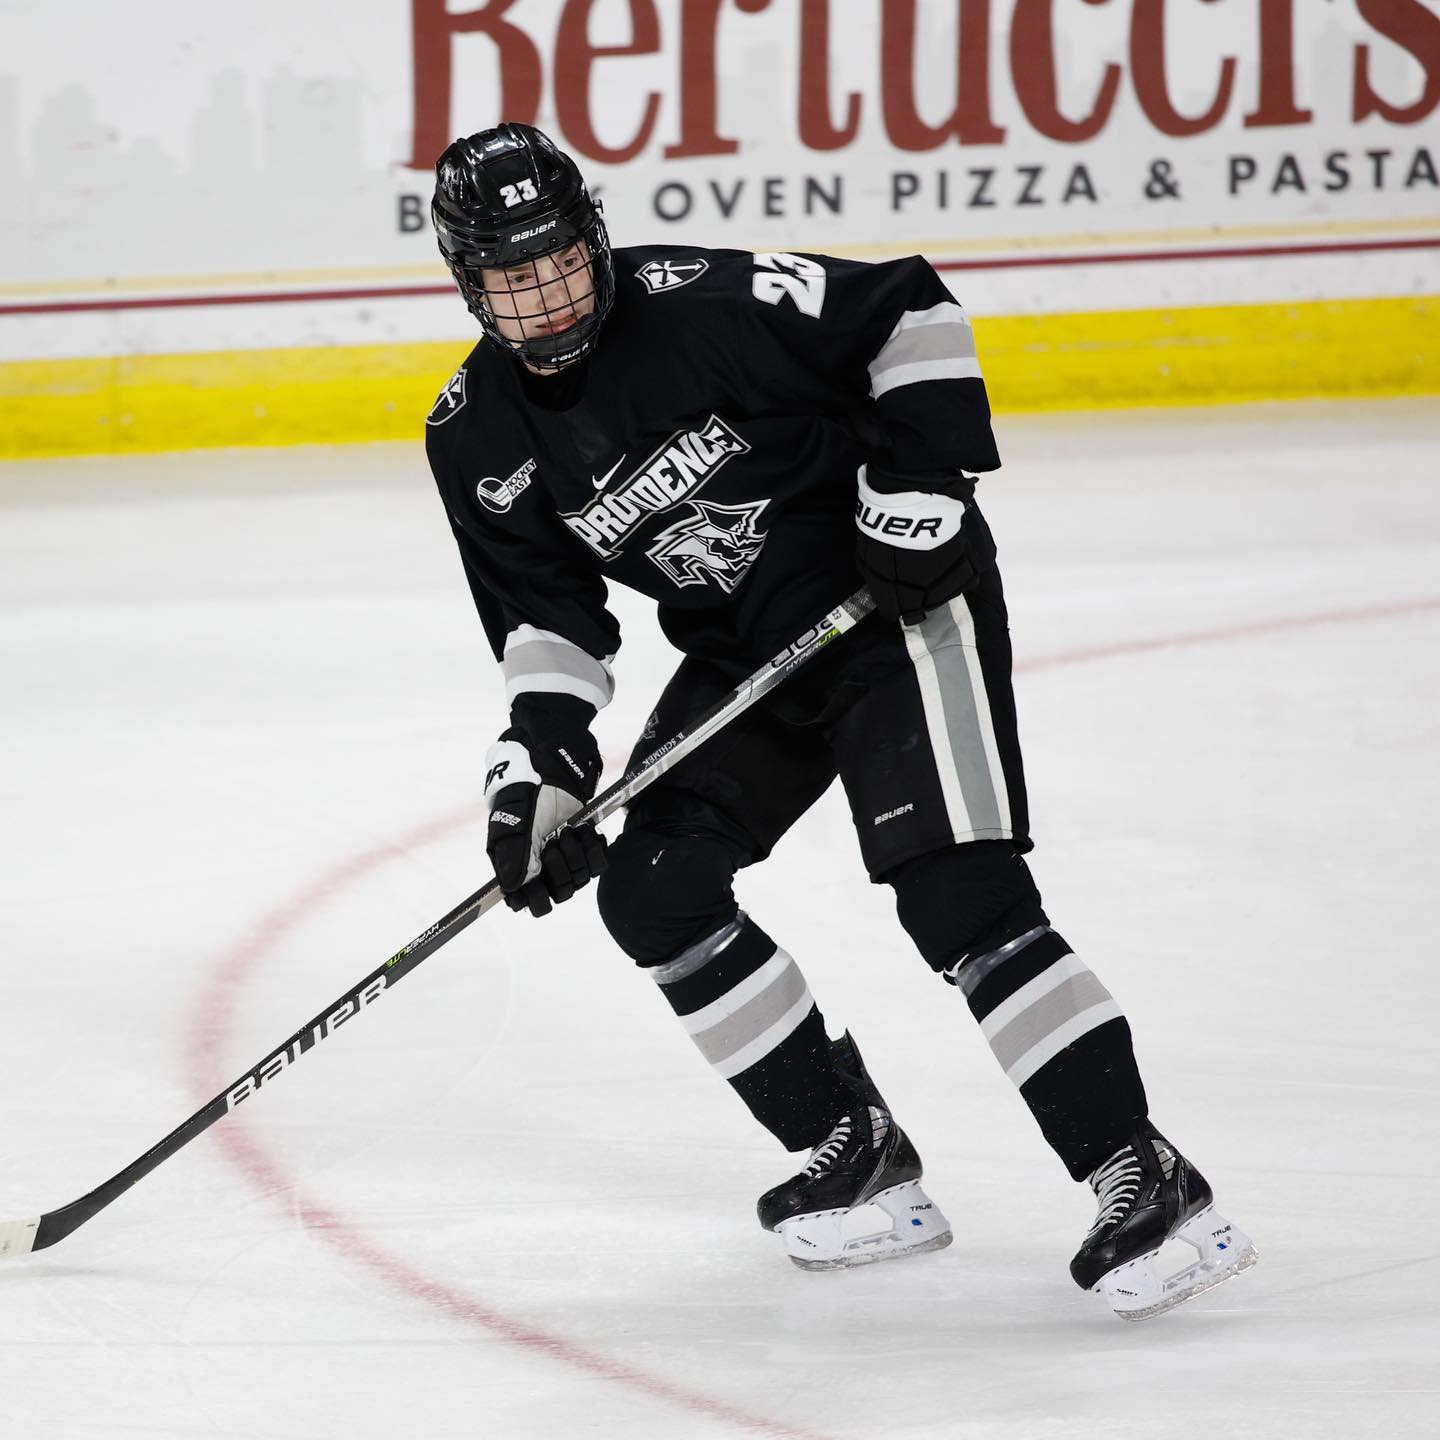 A hockey player on the Providence Friars hockey team skating during a match. Photo by Instagram user @friarshockey